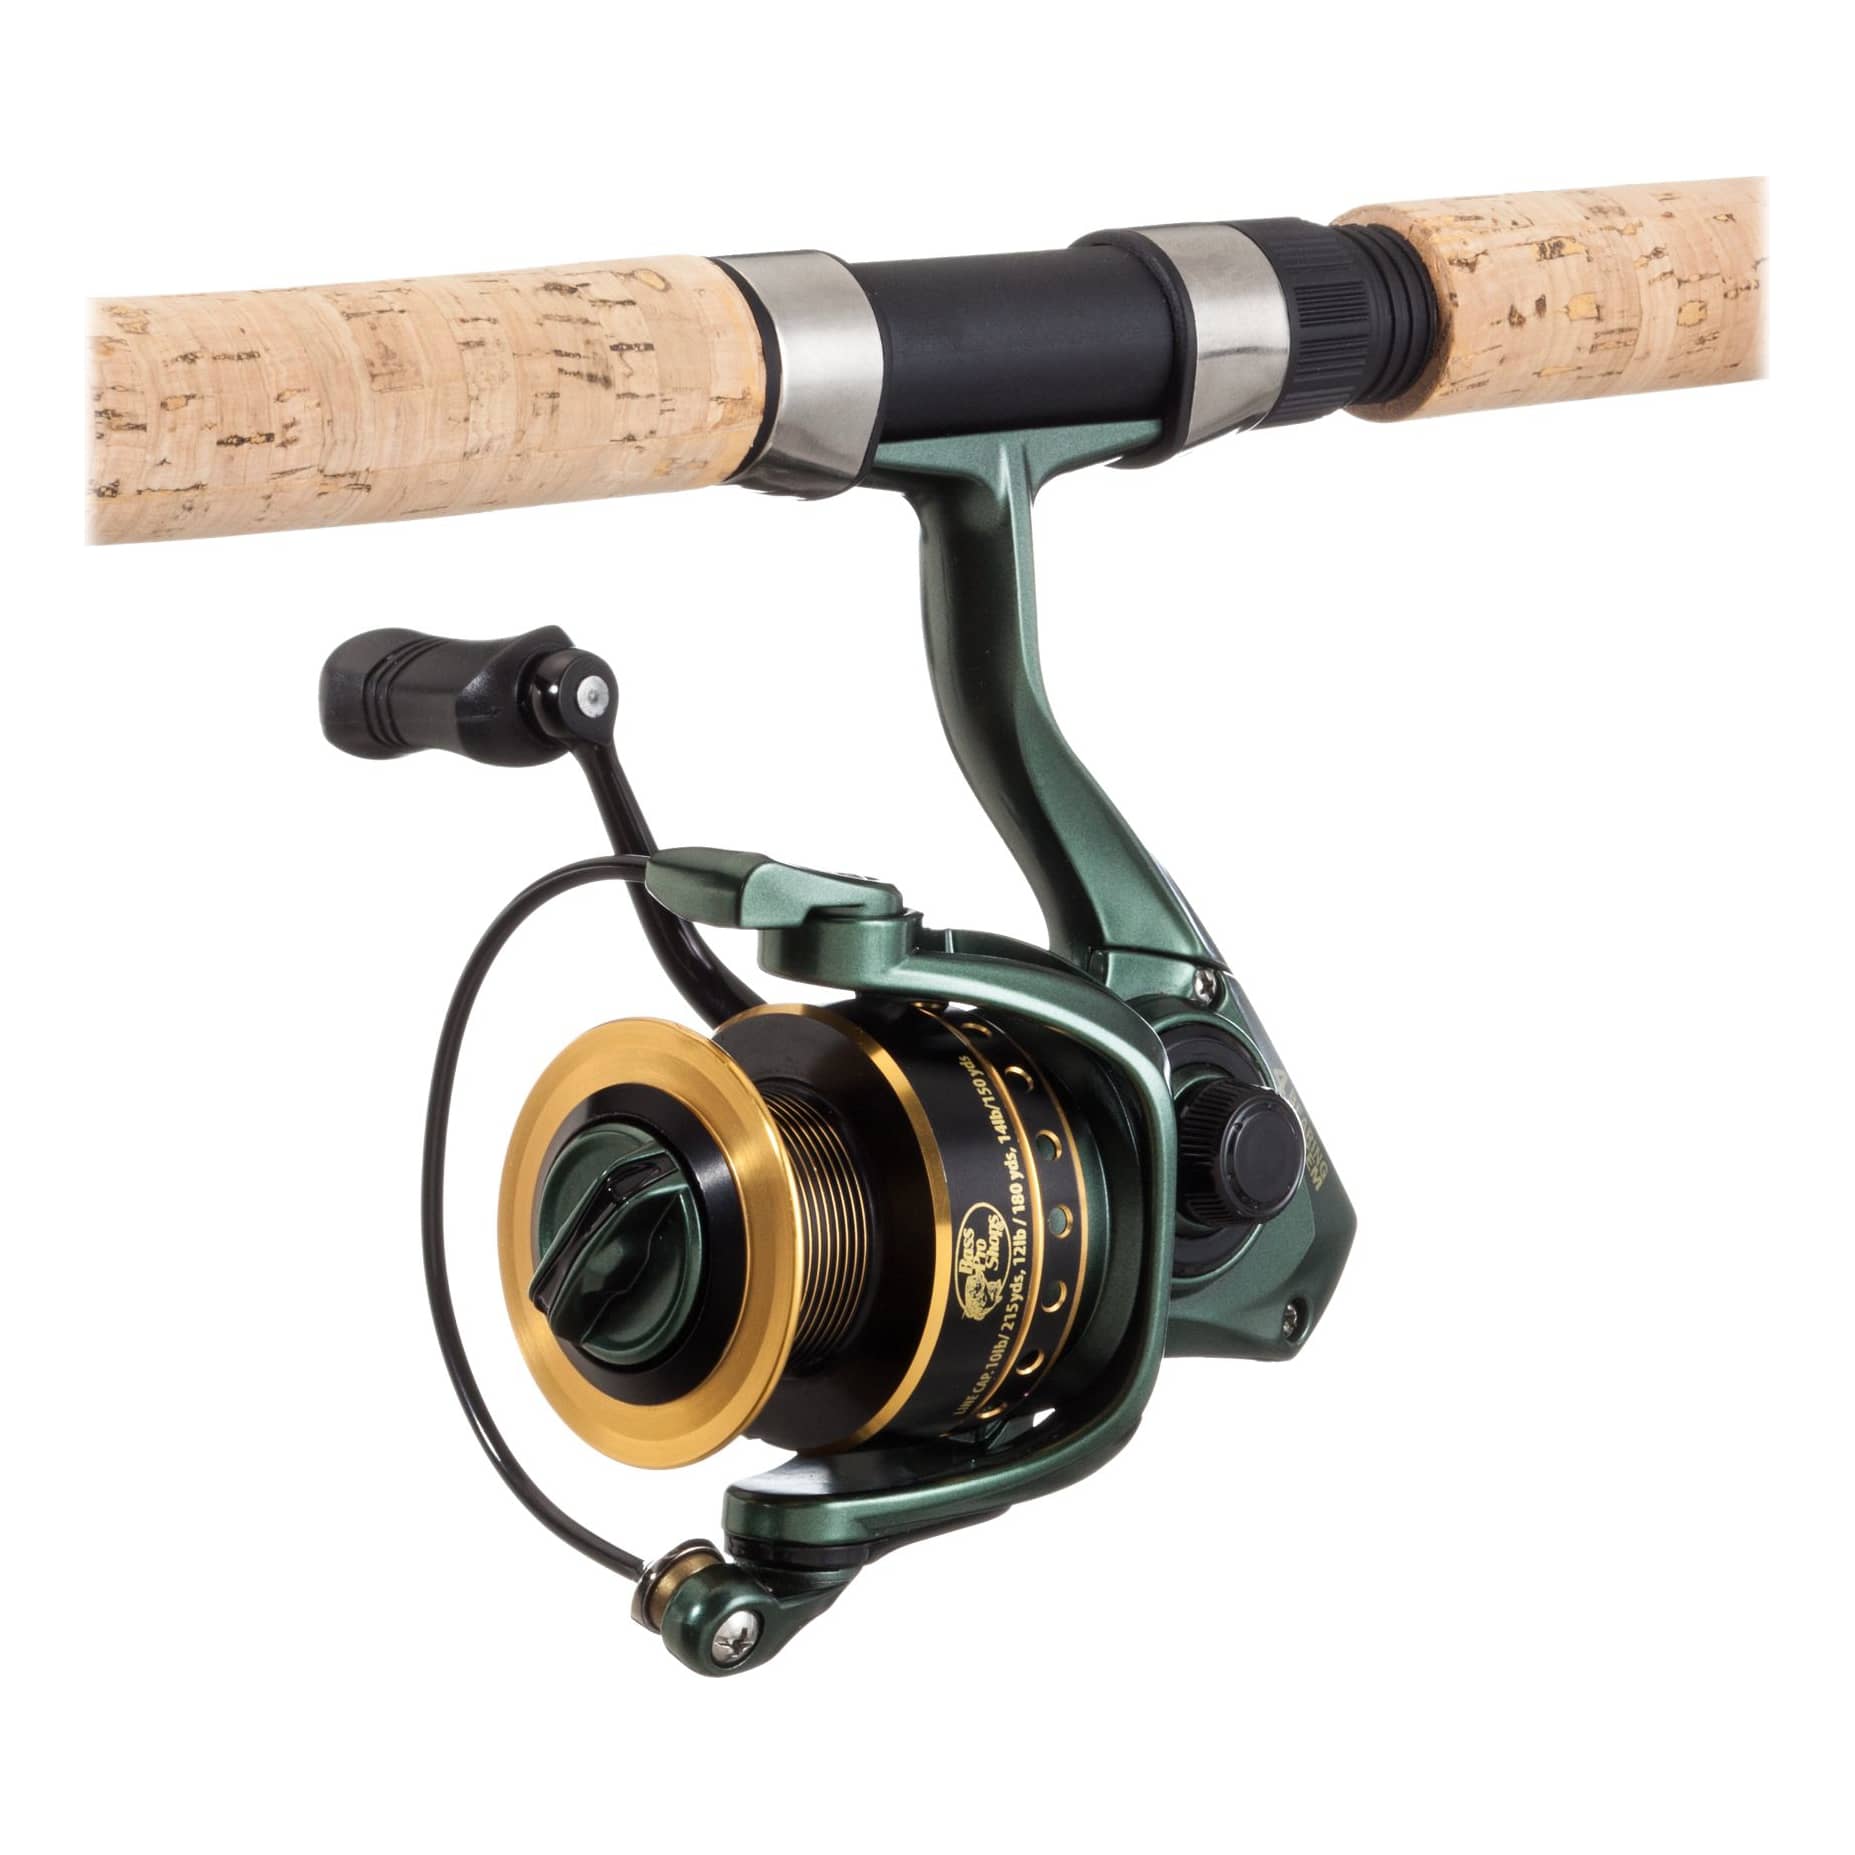 Bass Pro Shops® Borealis Rod And Reel Spinning Combo